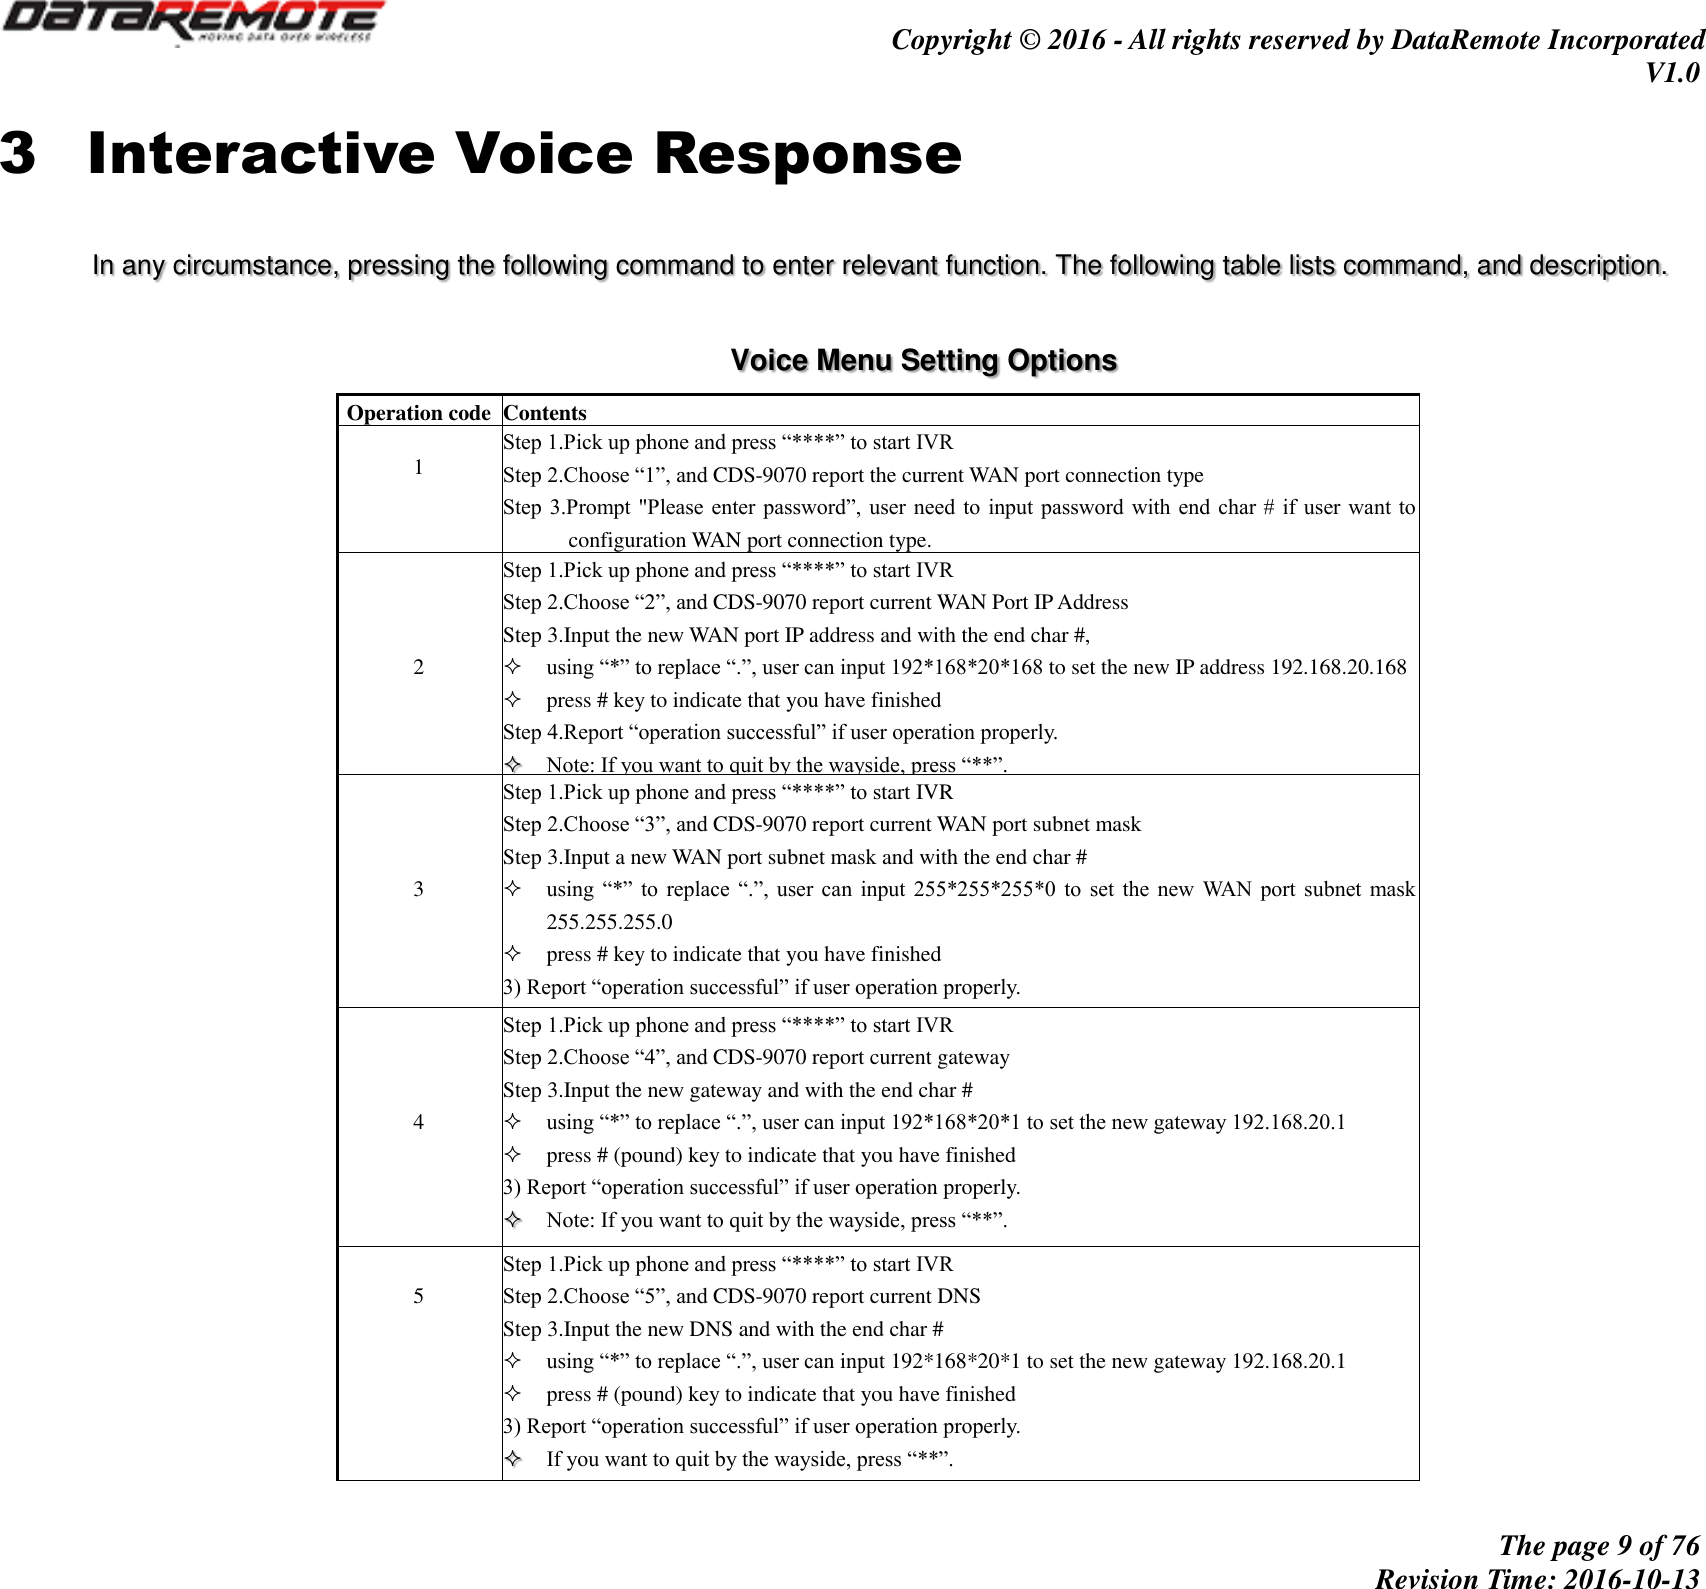                                         Copyright © 2016 - All rights reserved by DataRemote Incorporated V1.0                                                          The page 9 of 76 Revision Time: 2016-10-13     3 Interactive Voice Response In any circumstance, pressing the following command to enter relevant function. The following table lists command, and description.  Voice Menu Setting Options Operation code Contents 1  1Step 1.Pick up phone and press “****” to start IVR   Step 2.Choose “1”, and CDS-9070 report the current WAN port connection type Step 3.Prompt &quot;Please enter  password”, user  need  to  input password with end  char #  if  user  want to configuration WAN port connection type.  The  password  in  IVR  is  same  as  the  one  of  WEB  login,  user  can  use  phone  keypad  to  enter password directly, and the matching table is in Note 4.  For  example:  WEB  login  password  is  “admin”,  so  password  in  IVR  is  “admin” too,  user input “23646” to access and then configuration WAN connection port. Step 4.Report “operation successful” if password is right. Step 5.Choose the new WAN port connection type from 1.DHCP and 2.Static Step  6.Report  “operation  successful”,  this  means  user  make  the  changes  successfully,  and  then CDS-9070 will return to sound prompting “please enter your option, one WAN Port ……”.  Note: add “#” to assume after input password and selected new WAN port connection type  If you want to quit by the wayside, press “*”   2 Step 1.Pick up phone and press “****” to start IVR   Step 2.Choose “2”, and CDS-9070 report current WAN Port IP Address Step 3.Input the new WAN port IP address and with the end char #,  using “*” to replace “.”, user can input 192*168*20*168 to set the new IP address 192.168.20.168  press # key to indicate that you have finished Step 4.Report “operation successful” if user operation properly.  Note: If you want to quit by the wayside, press “**”.    3 Step 1.Pick up phone and press “****” to start IVR   Step 2.Choose “3”, and CDS-9070 report current WAN port subnet mask Step 3.Input a new WAN port subnet mask and with the end char #  using  “*”  to  replace  “.”,  user  can  input  255*255*255*0  to  set  the  new  WAN  port  subnet  mask 255.255.255.0  press # key to indicate that you have finished 3) Report “operation successful” if user operation properly.  Note: If you want to quit by the wayside, press “**”.    4 Step 1.Pick up phone and press “****” to start IVR   Step 2.Choose “4”, and CDS-9070 report current gateway Step 3.Input the new gateway and with the end char #  using “*” to replace “.”, user can input 192*168*20*1 to set the new gateway 192.168.20.1  press # (pound) key to indicate that you have finished 3) Report “operation successful” if user operation properly.  Note: If you want to quit by the wayside, press “**”.  5 Step 1.Pick up phone and press “****” to start IVR   Step 2.Choose “5”, and CDS-9070 report current DNS Step 3.Input the new DNS and with the end char #  using “*” to replace “.”, user can input 192*168*20*1 to set the new gateway 192.168.20.1  press # (pound) key to indicate that you have finished 3) Report “operation successful” if user operation properly.  If you want to quit by the wayside, press “**”. 